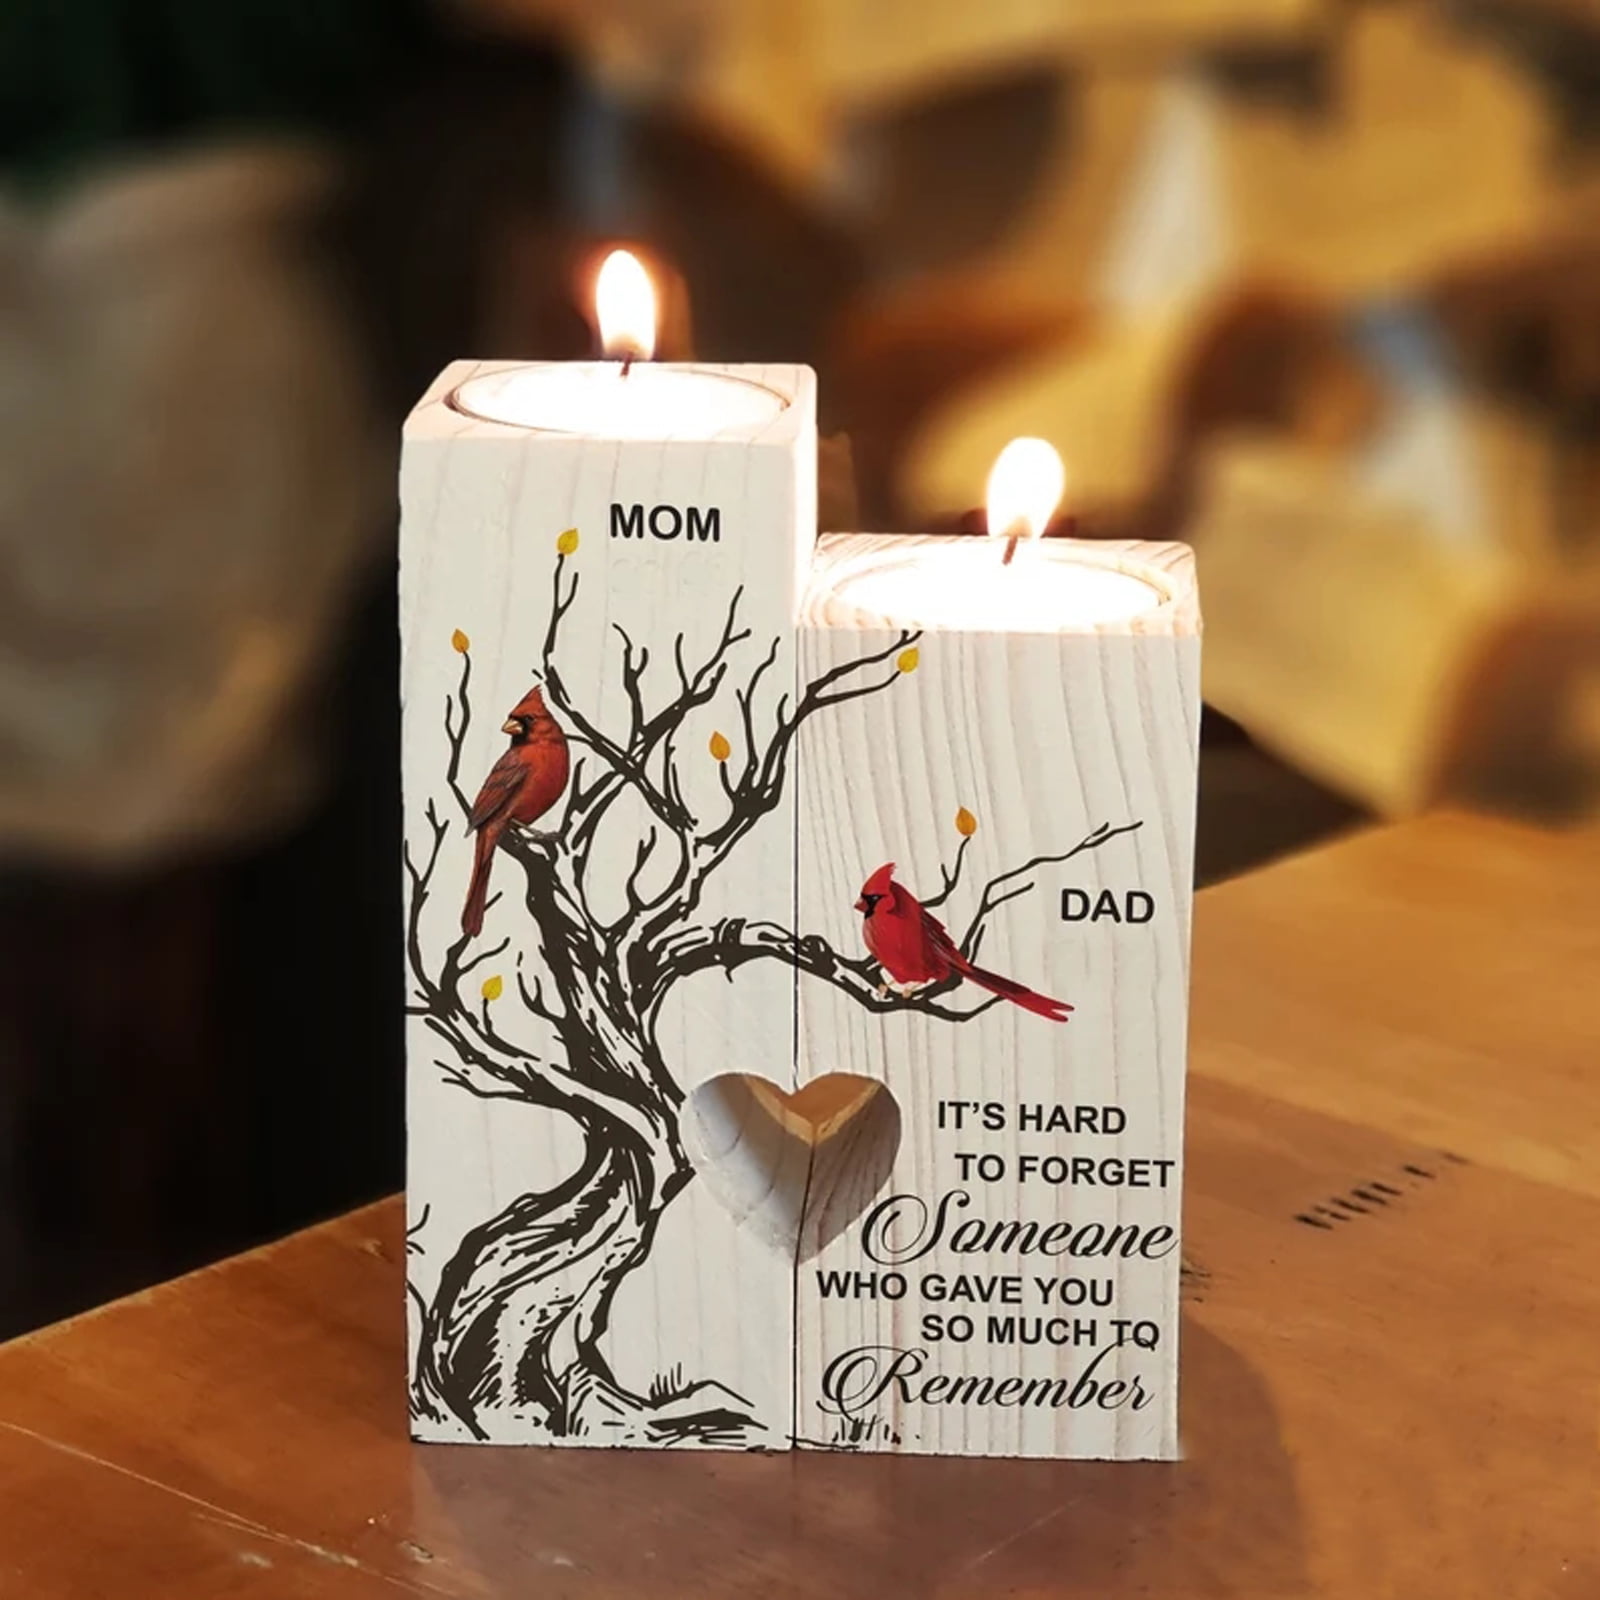 Pianpianzi Memento Candle Abstract Candle This Place down Candle Holder  Decorated Shaped Holder Heart Candle With Beautiful Wooden Candle Meaning  Home Decor 